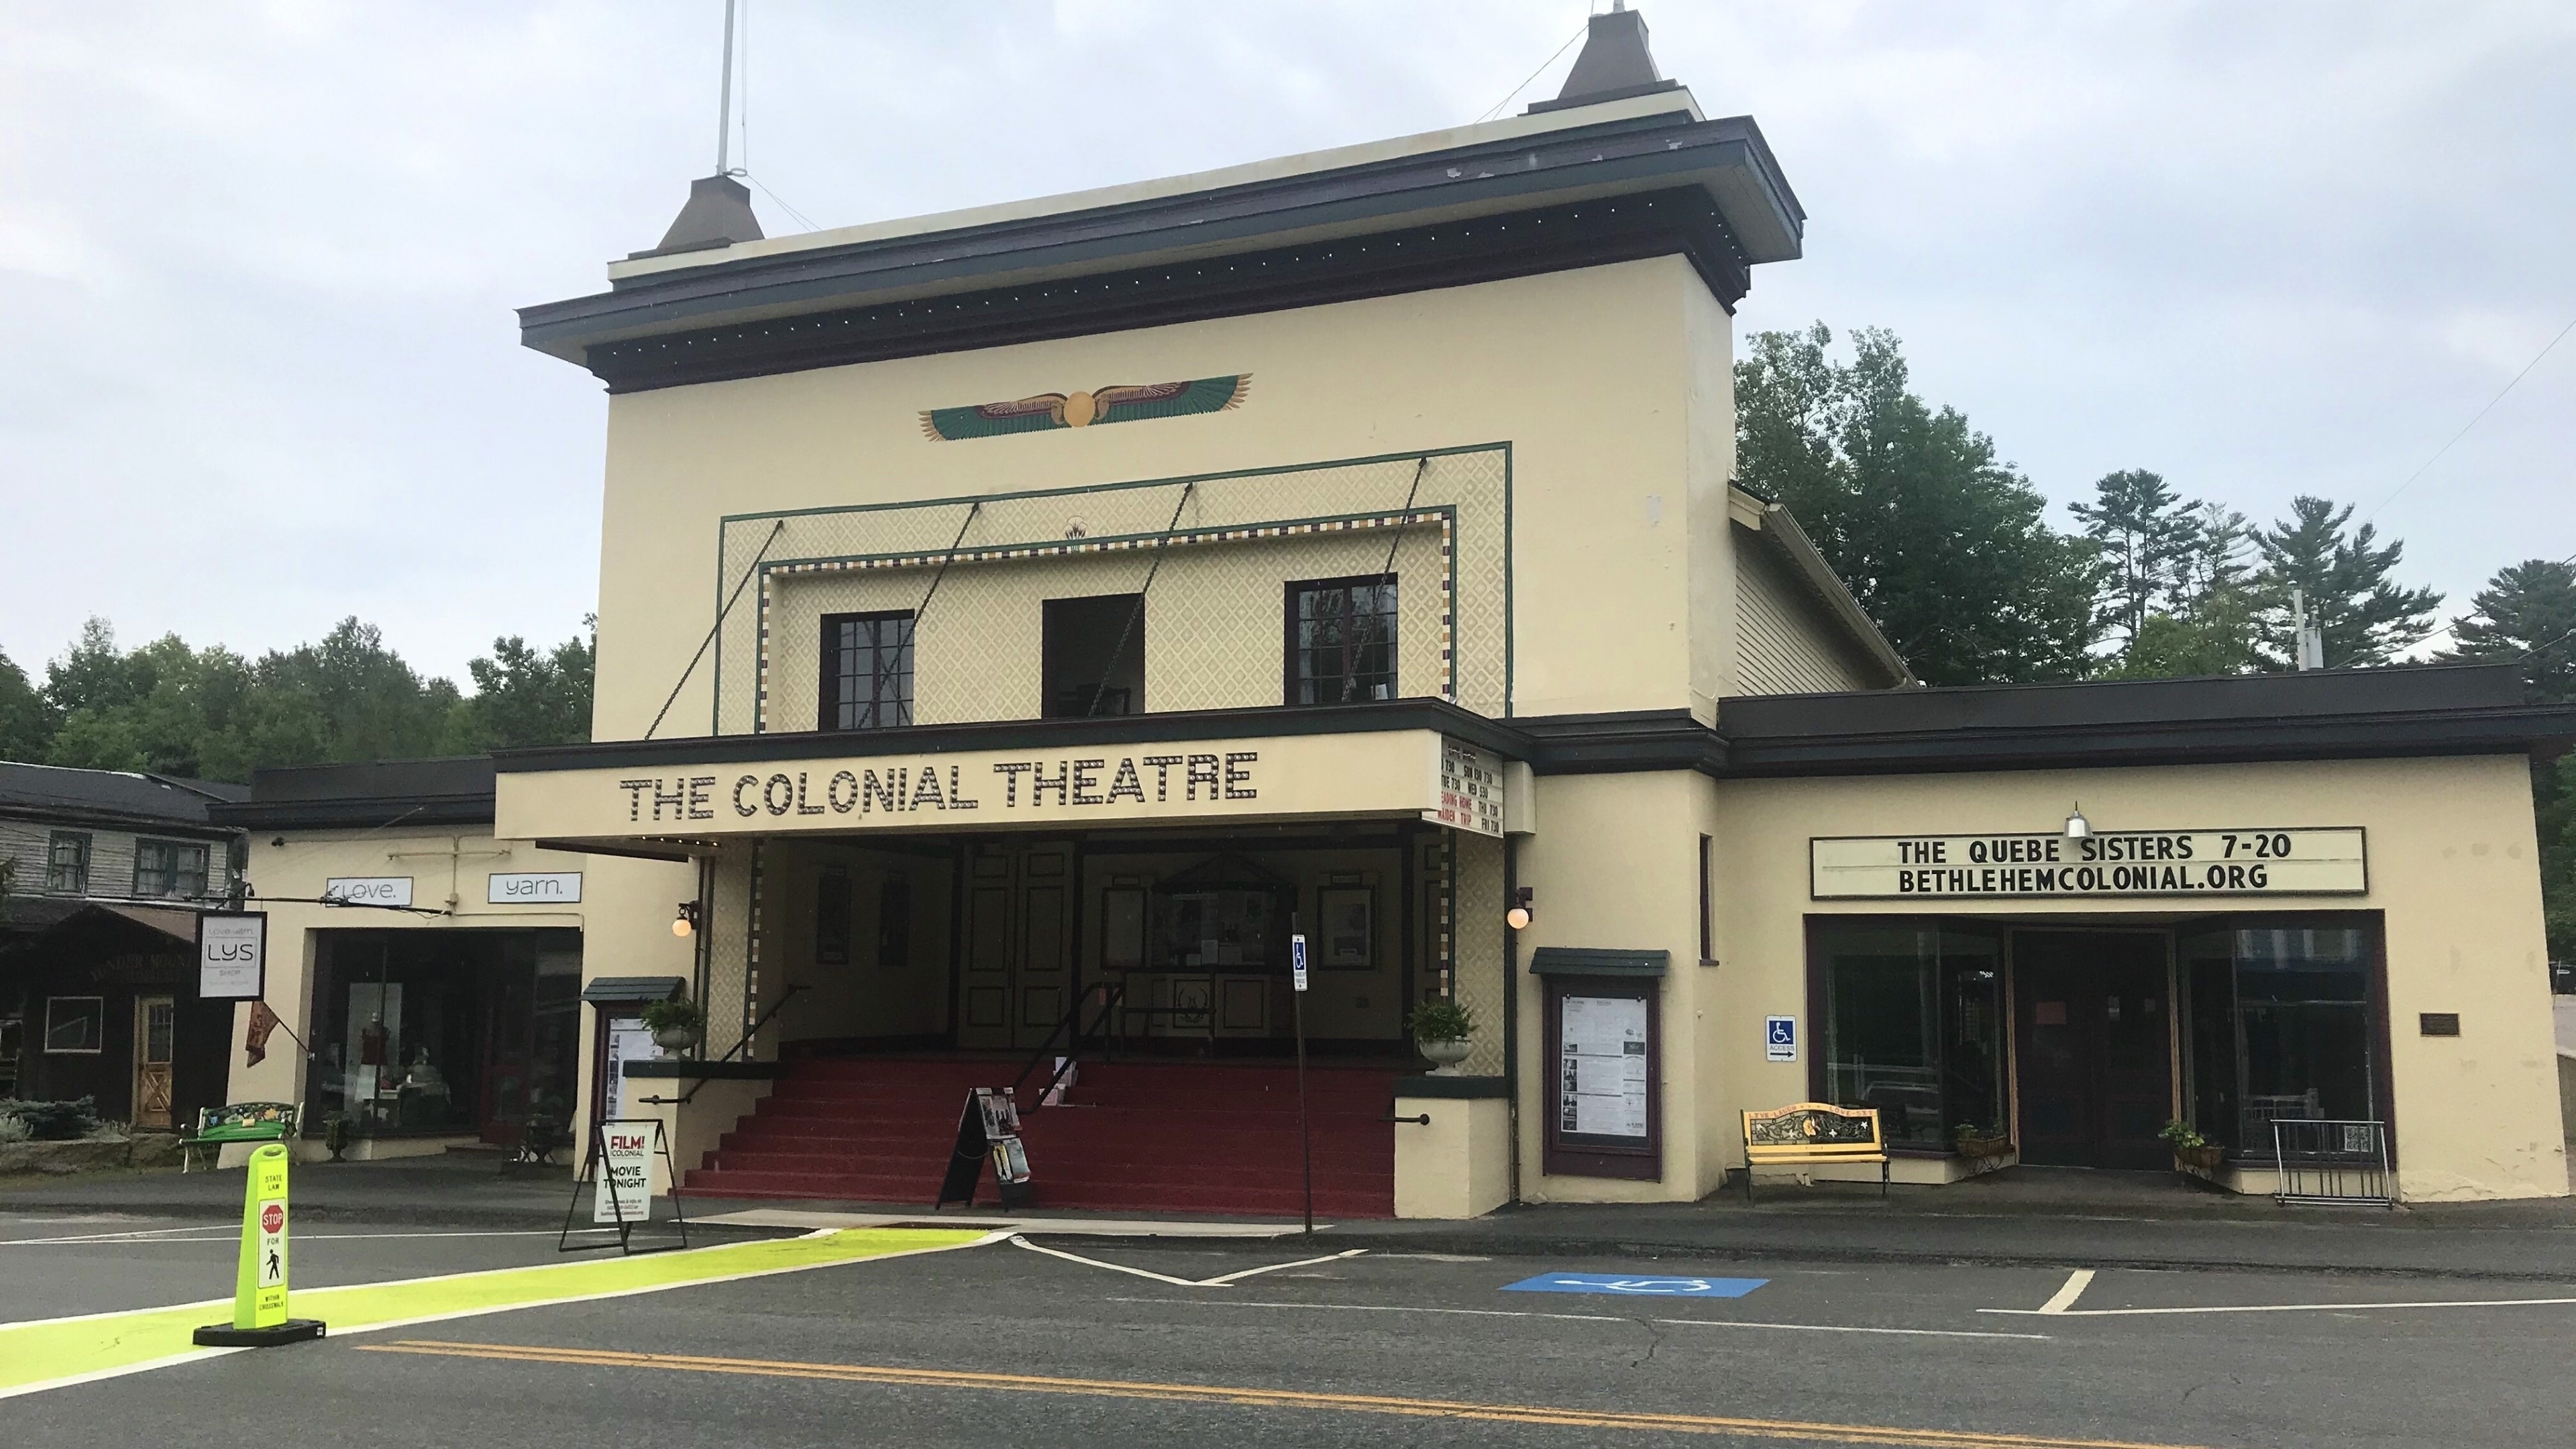 The Colonial Theater in Bethlehem, New Hampshire  is one of the oldest continually running cinemas in the country. It was built in 1915. Later in the year blankets to keep warm are provided for the patrons.
A few years ago a new digital projector together with an improved sound system was installed and this has considerably enhanced the viewing and listening experience!